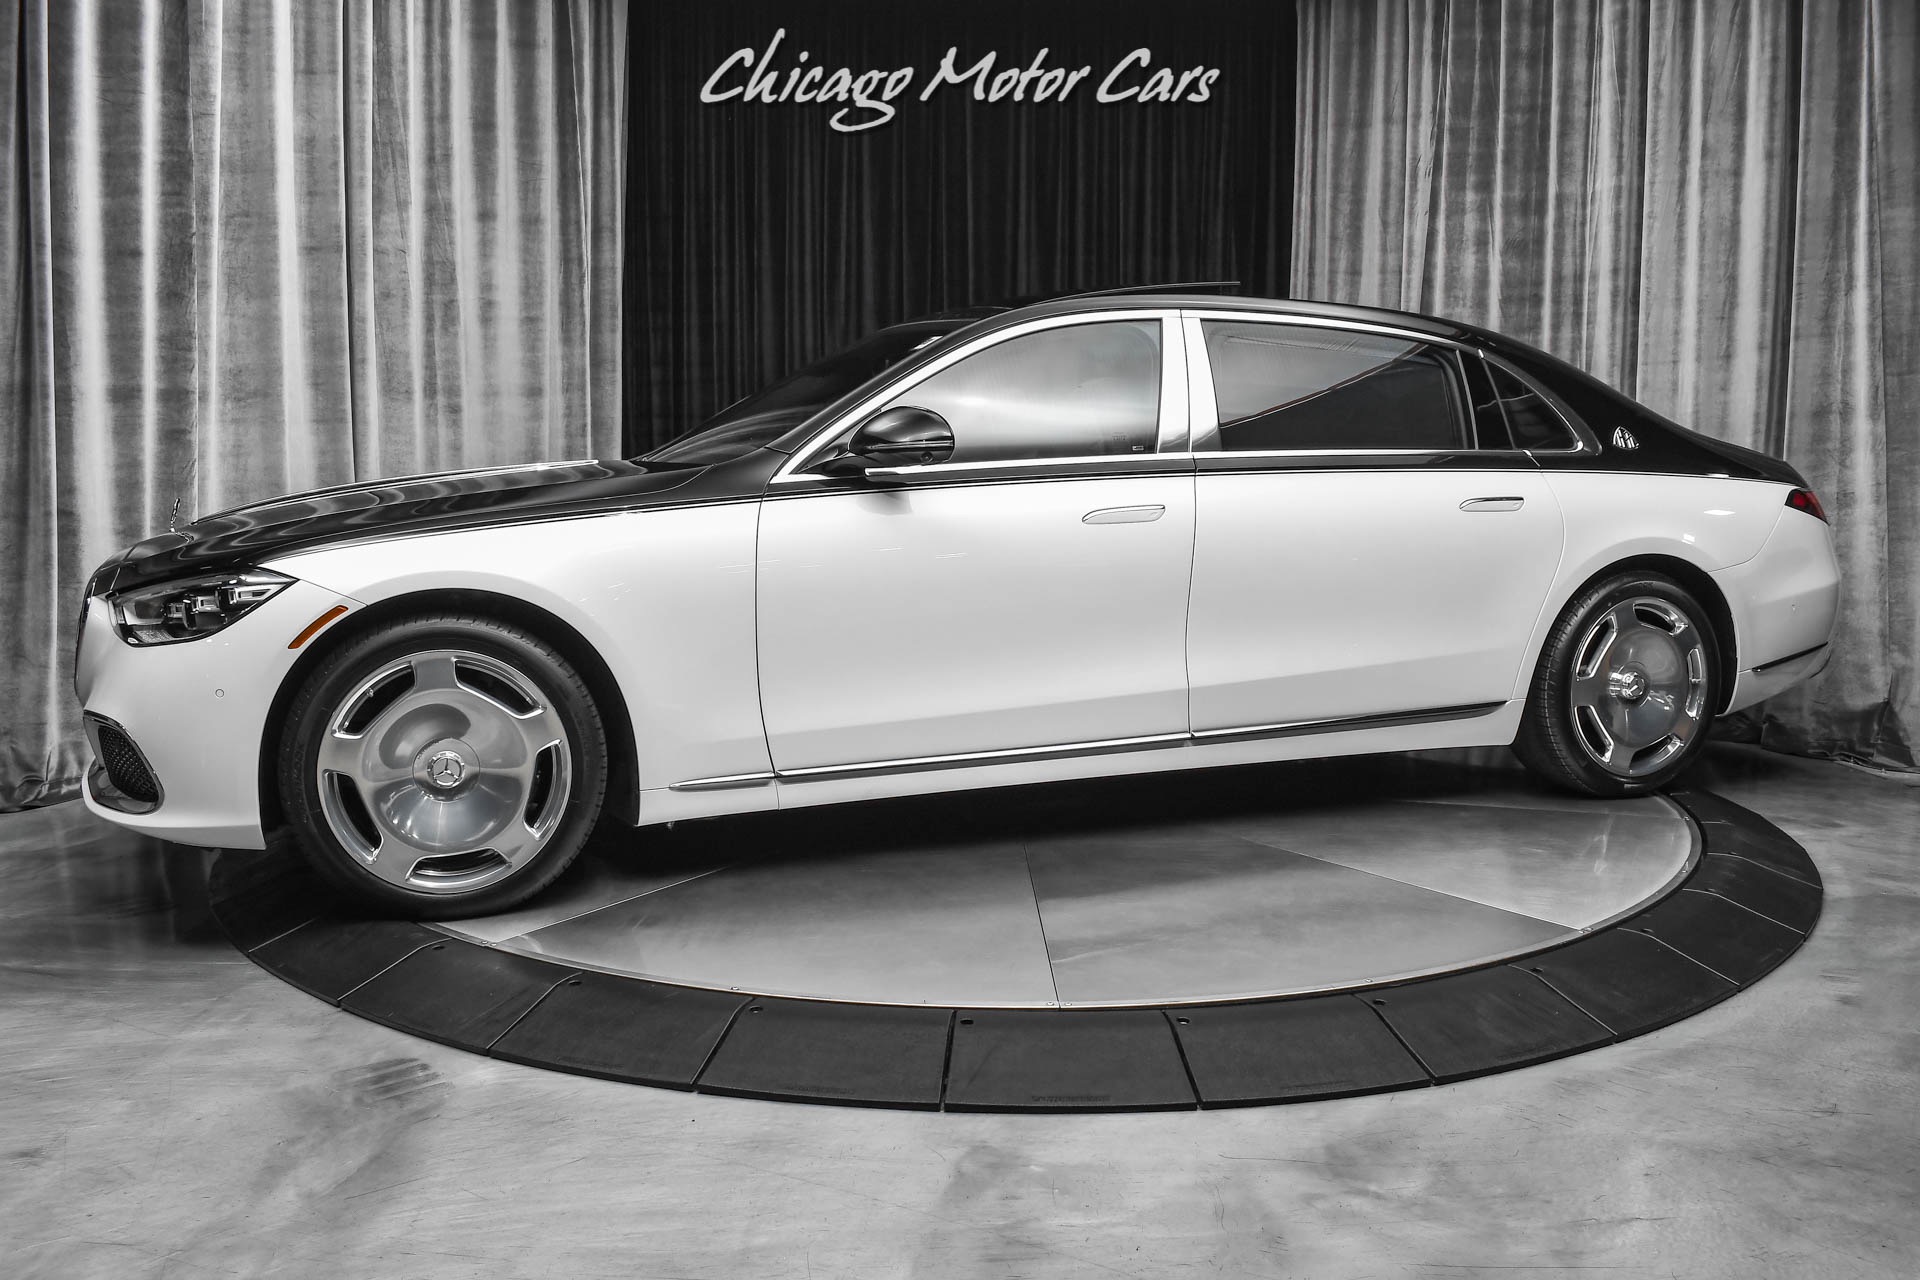 Used 2022 Mercedes-Benz S580 Maybach Maybach S580 4Matic Luxury Sedan  Delivery Miles! 2 Tone! LOADED! For Sale (Special Pricing) | Chicago Motor  Cars Stock #19279